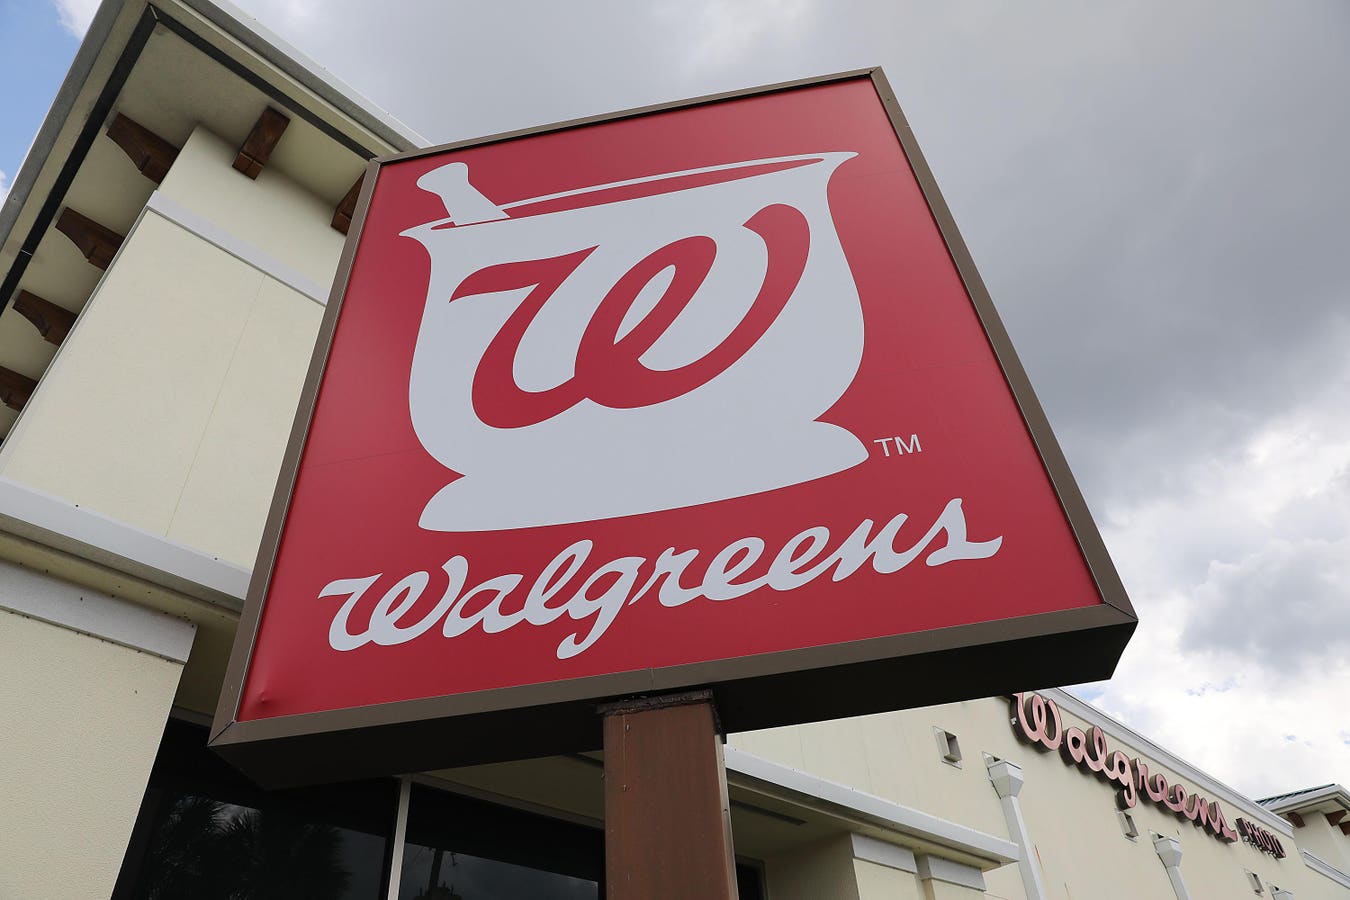 Walgreens To Launch $24 Billion Business Dedicated To Specialty Pharmacy